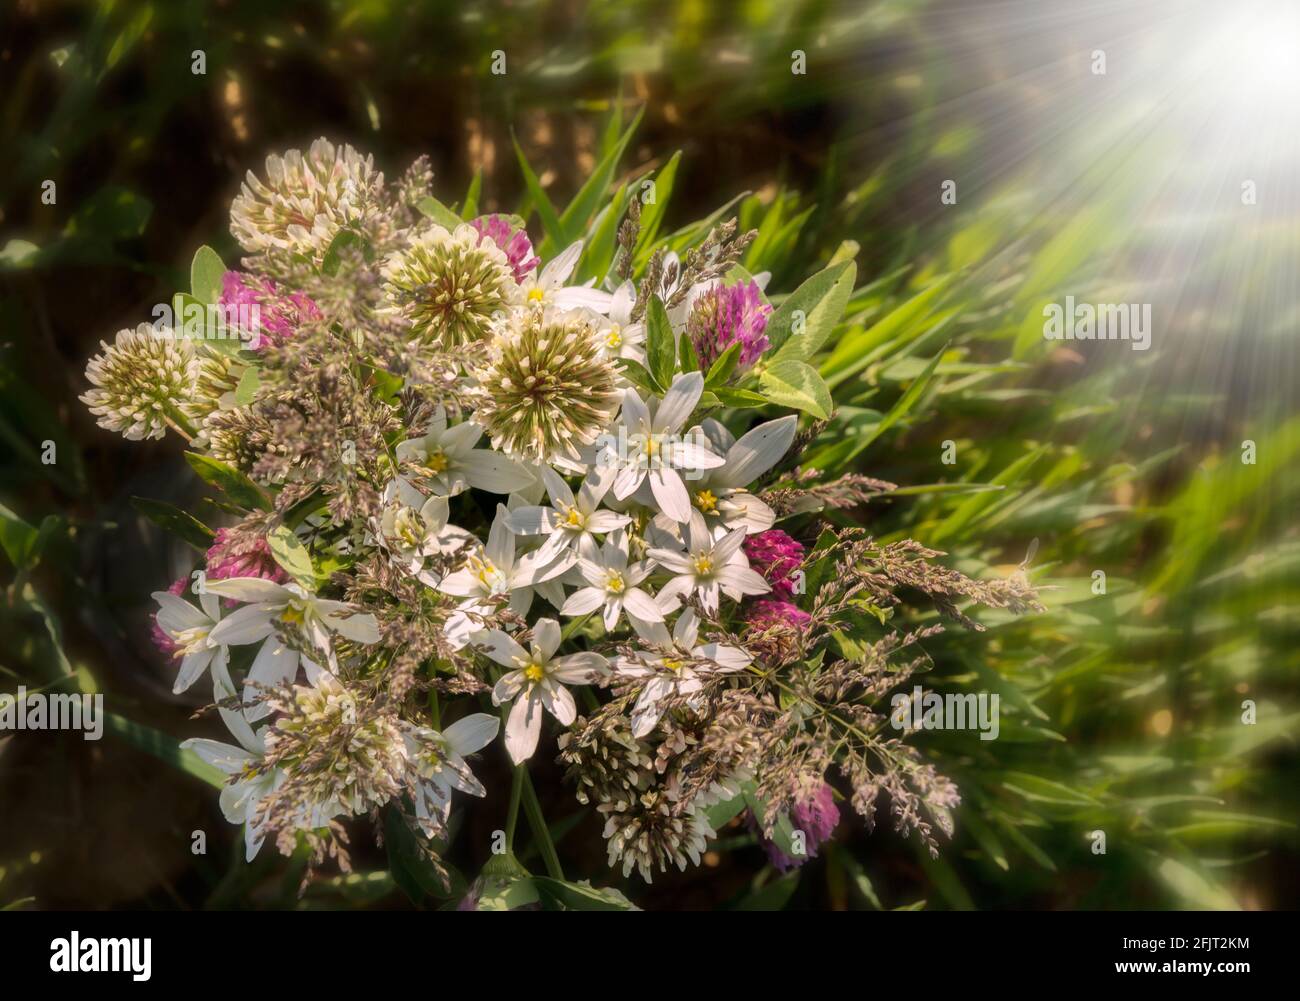 bouquet of wildflowers with clover flowers and white flowers,  blurred background with light bokeh and short depth of field. Stock Photo